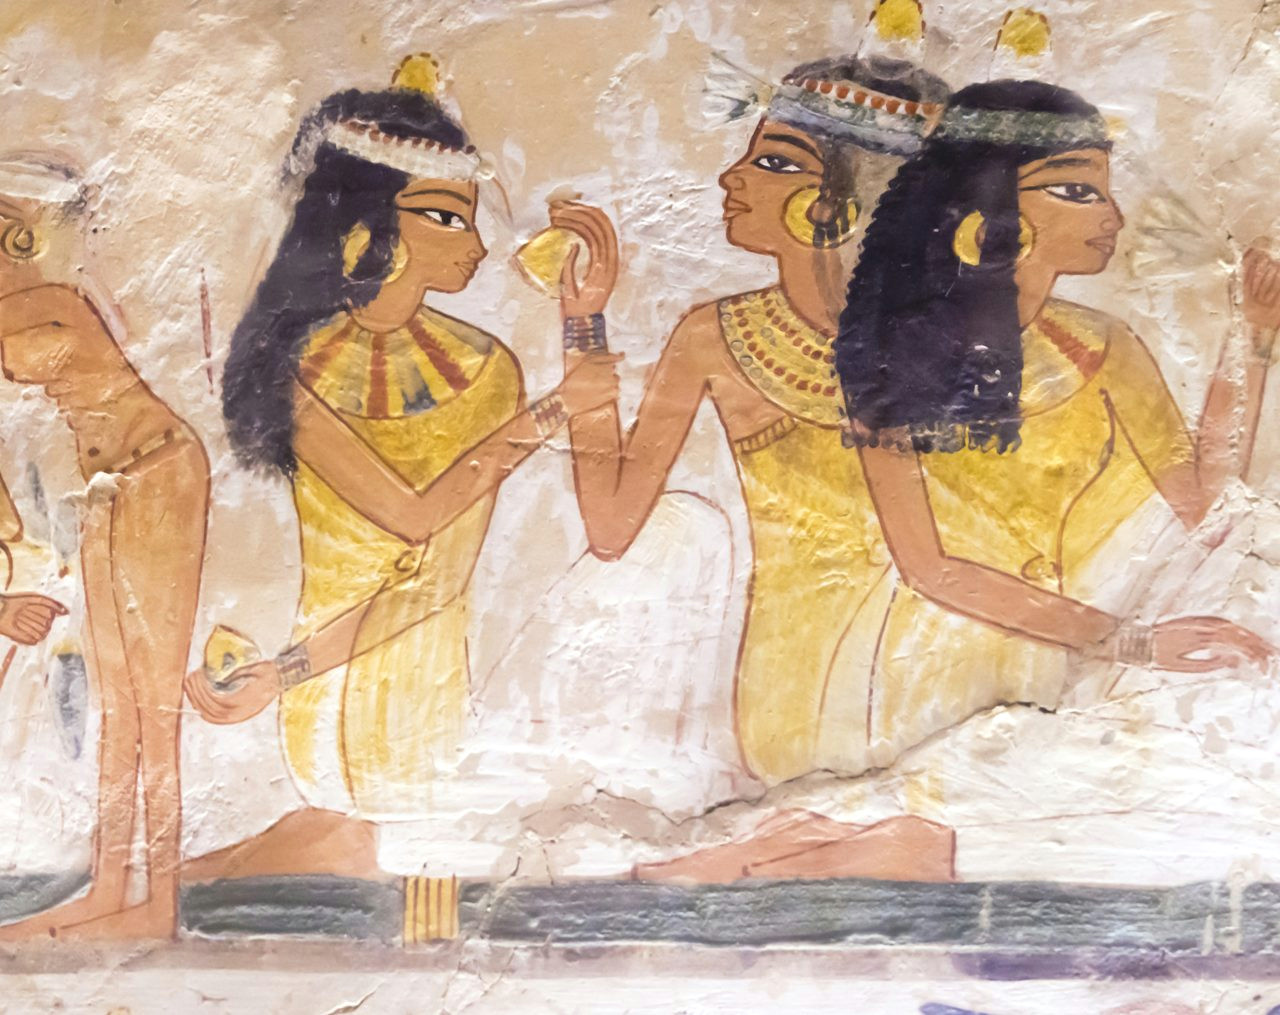 the role and power of women in ancient egypt